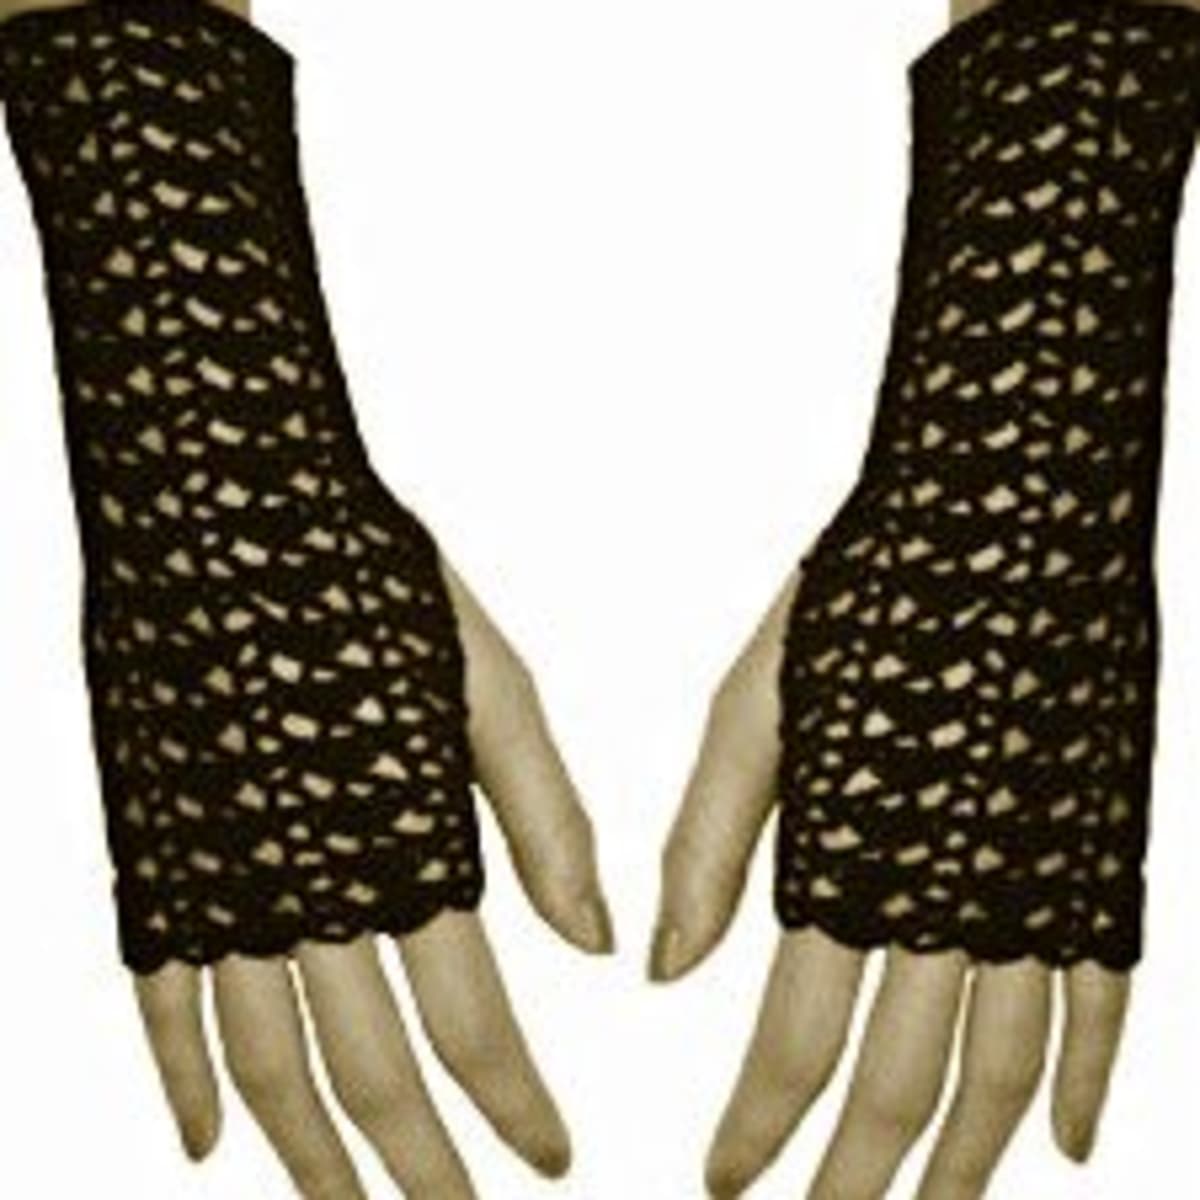 FINGERLESS MITTS Gloves Victorian Civil War Hand-Crochet  Many Colors 100%Cotton 